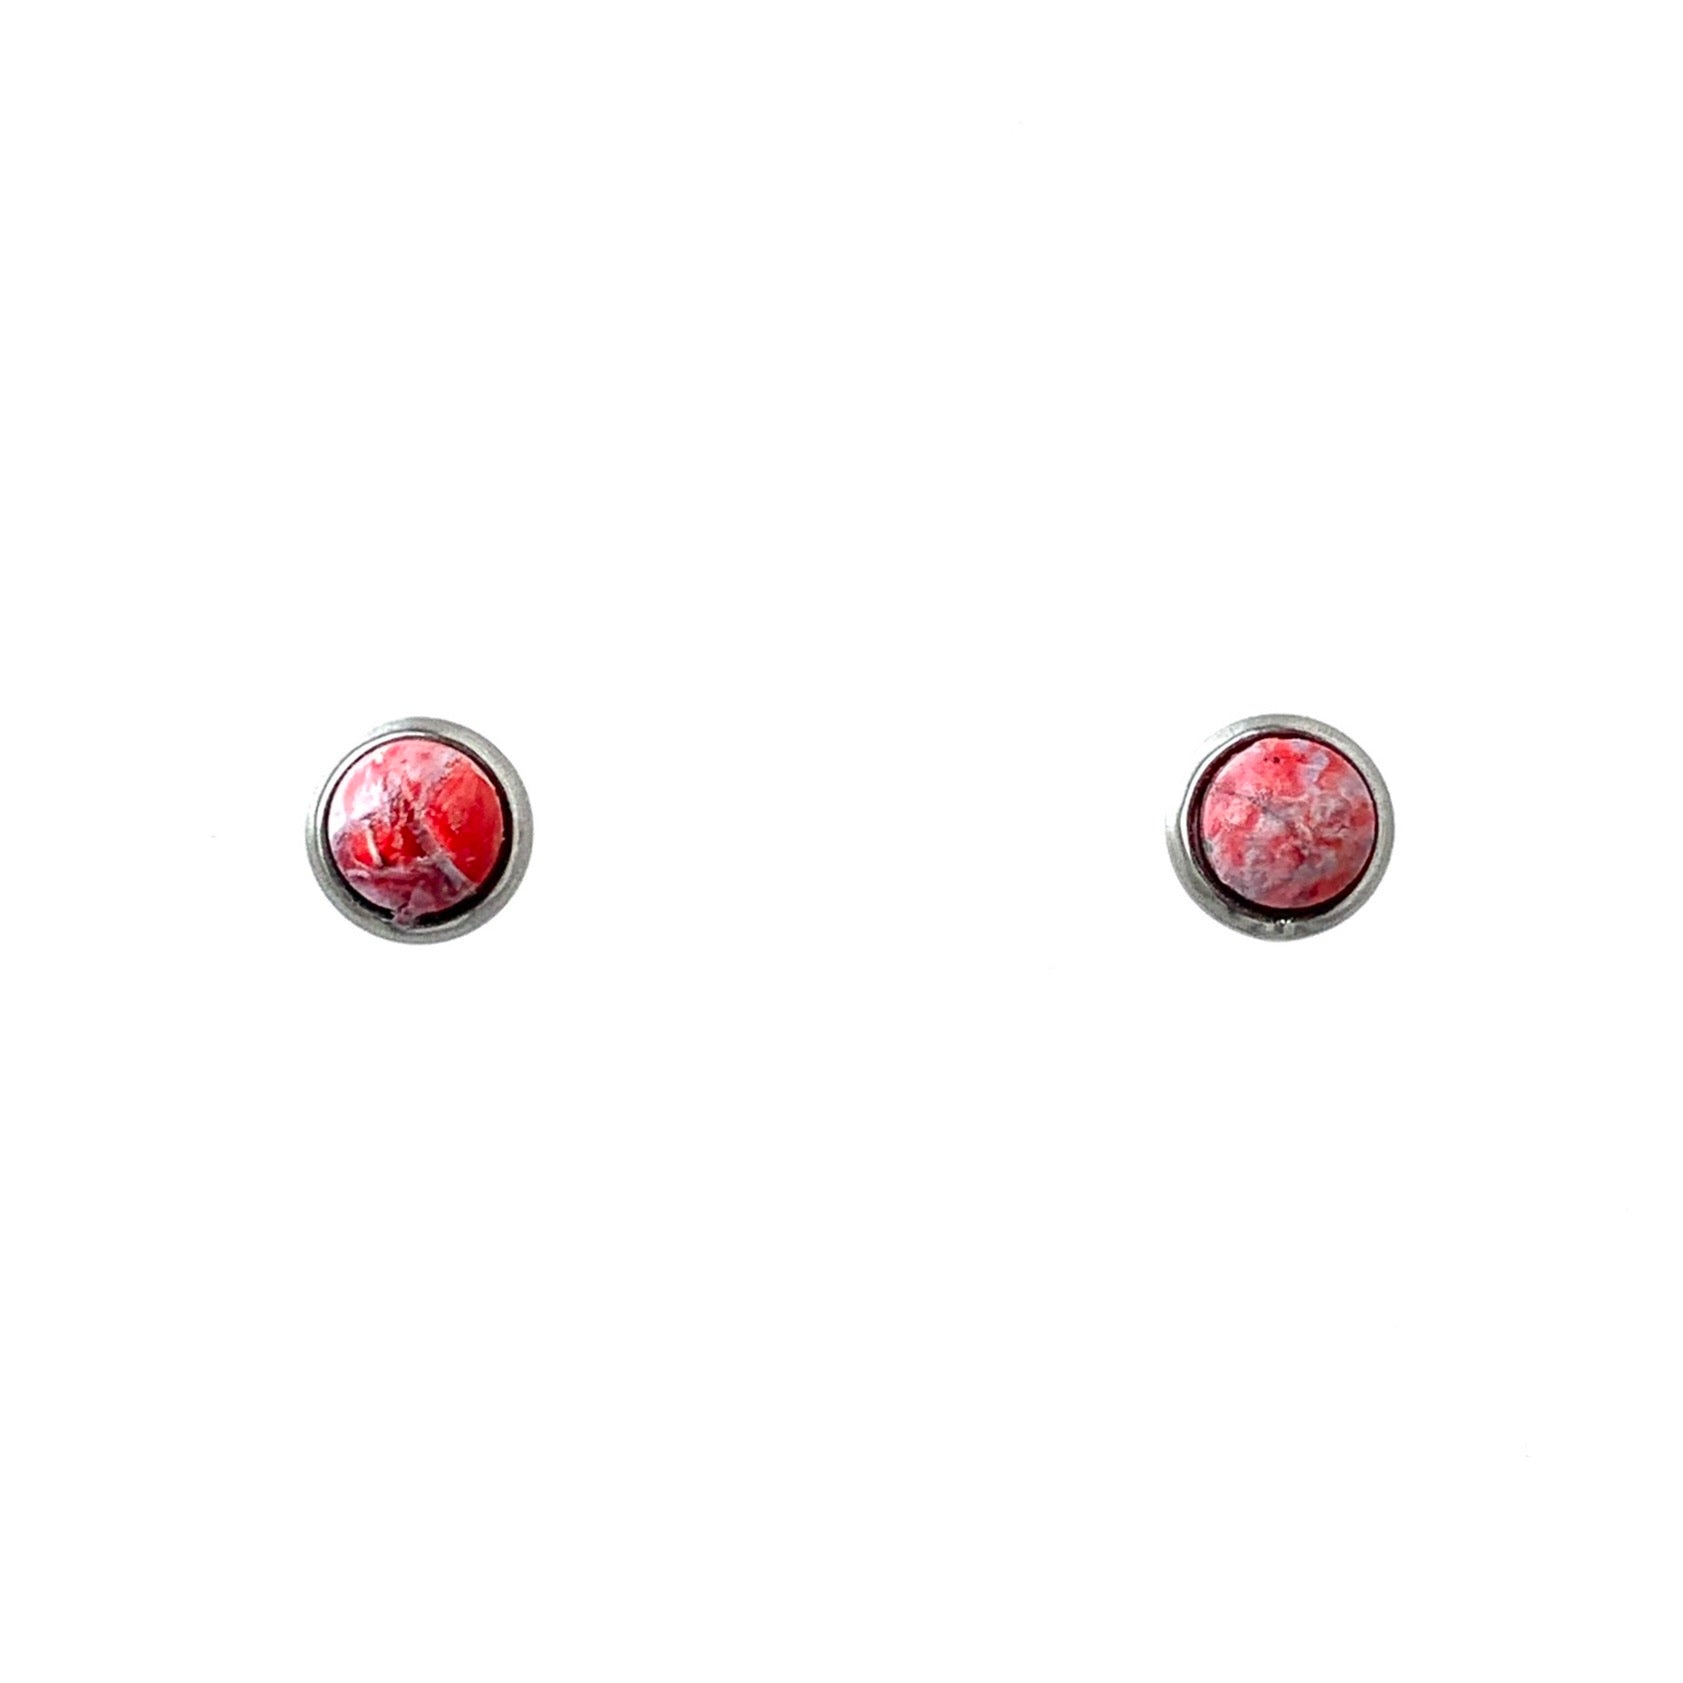 Small red studs handmade stainless steel